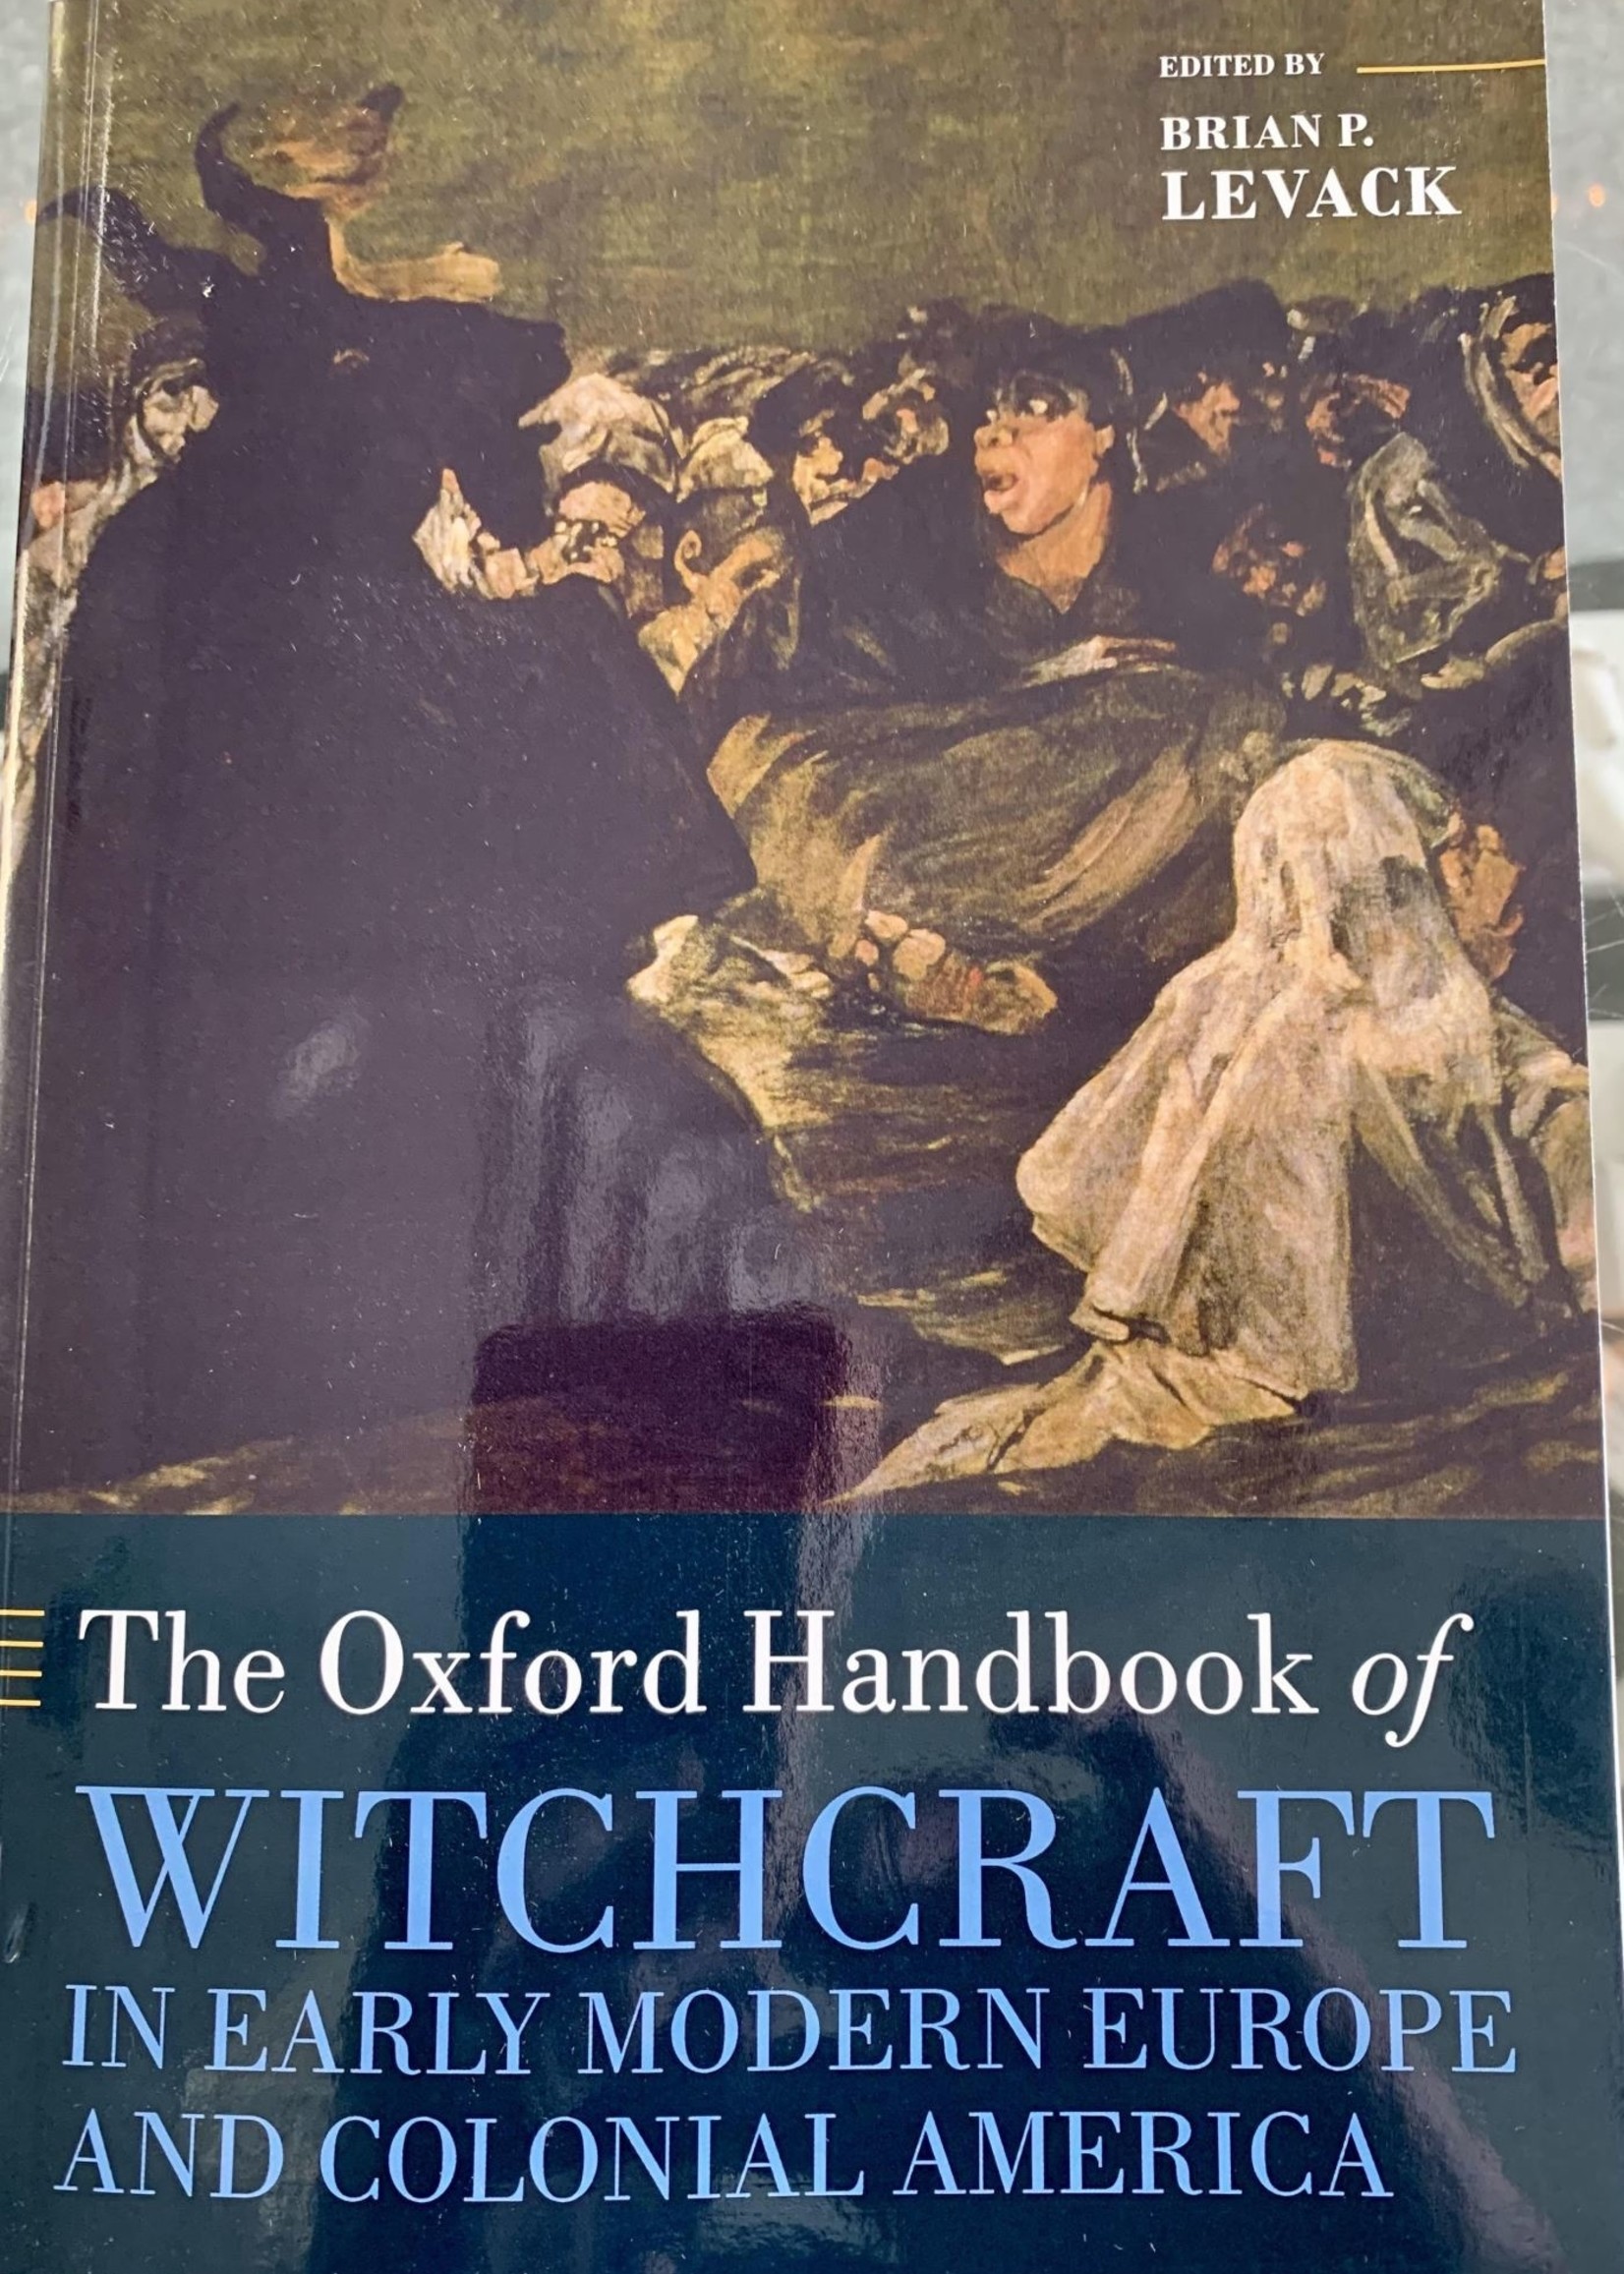 The Oxford Handbook of Witchcraft in Early Modern Europe and Colonial America - Edited by Brian P. Levack